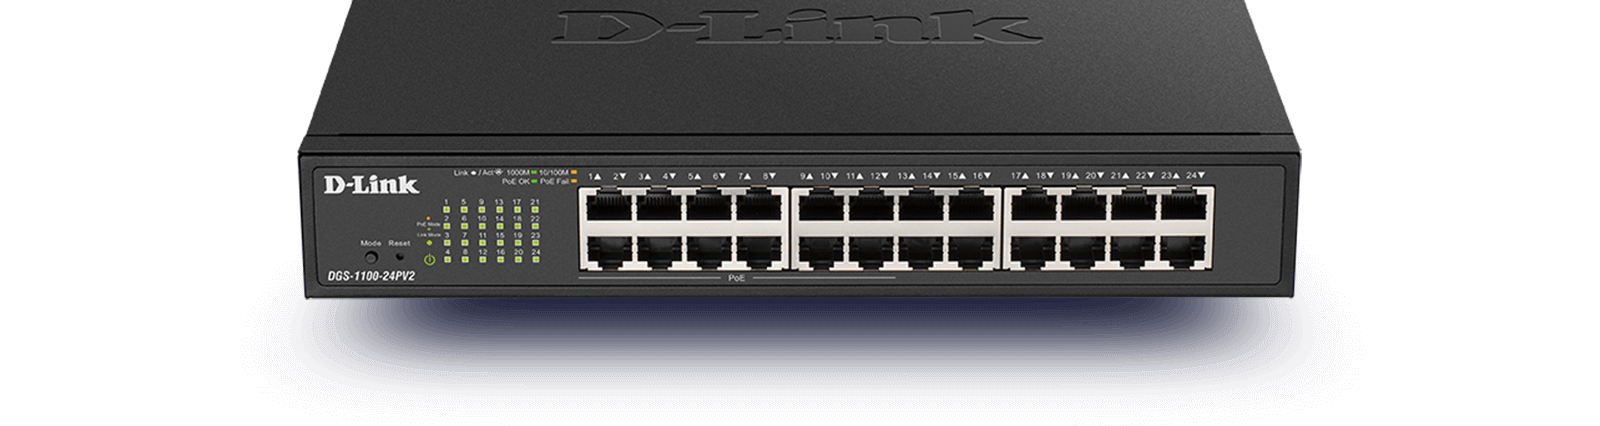 D-Link 54 Port 10GbE/40GbE Open Network Switch - Manageable - 3 Layer  Supported - Modular - Optical Fiber - 1U High - Rack-mountable, Cabinet  Mount - Lifetime Limited Warranty DXS-5000-54S/AF-PNE